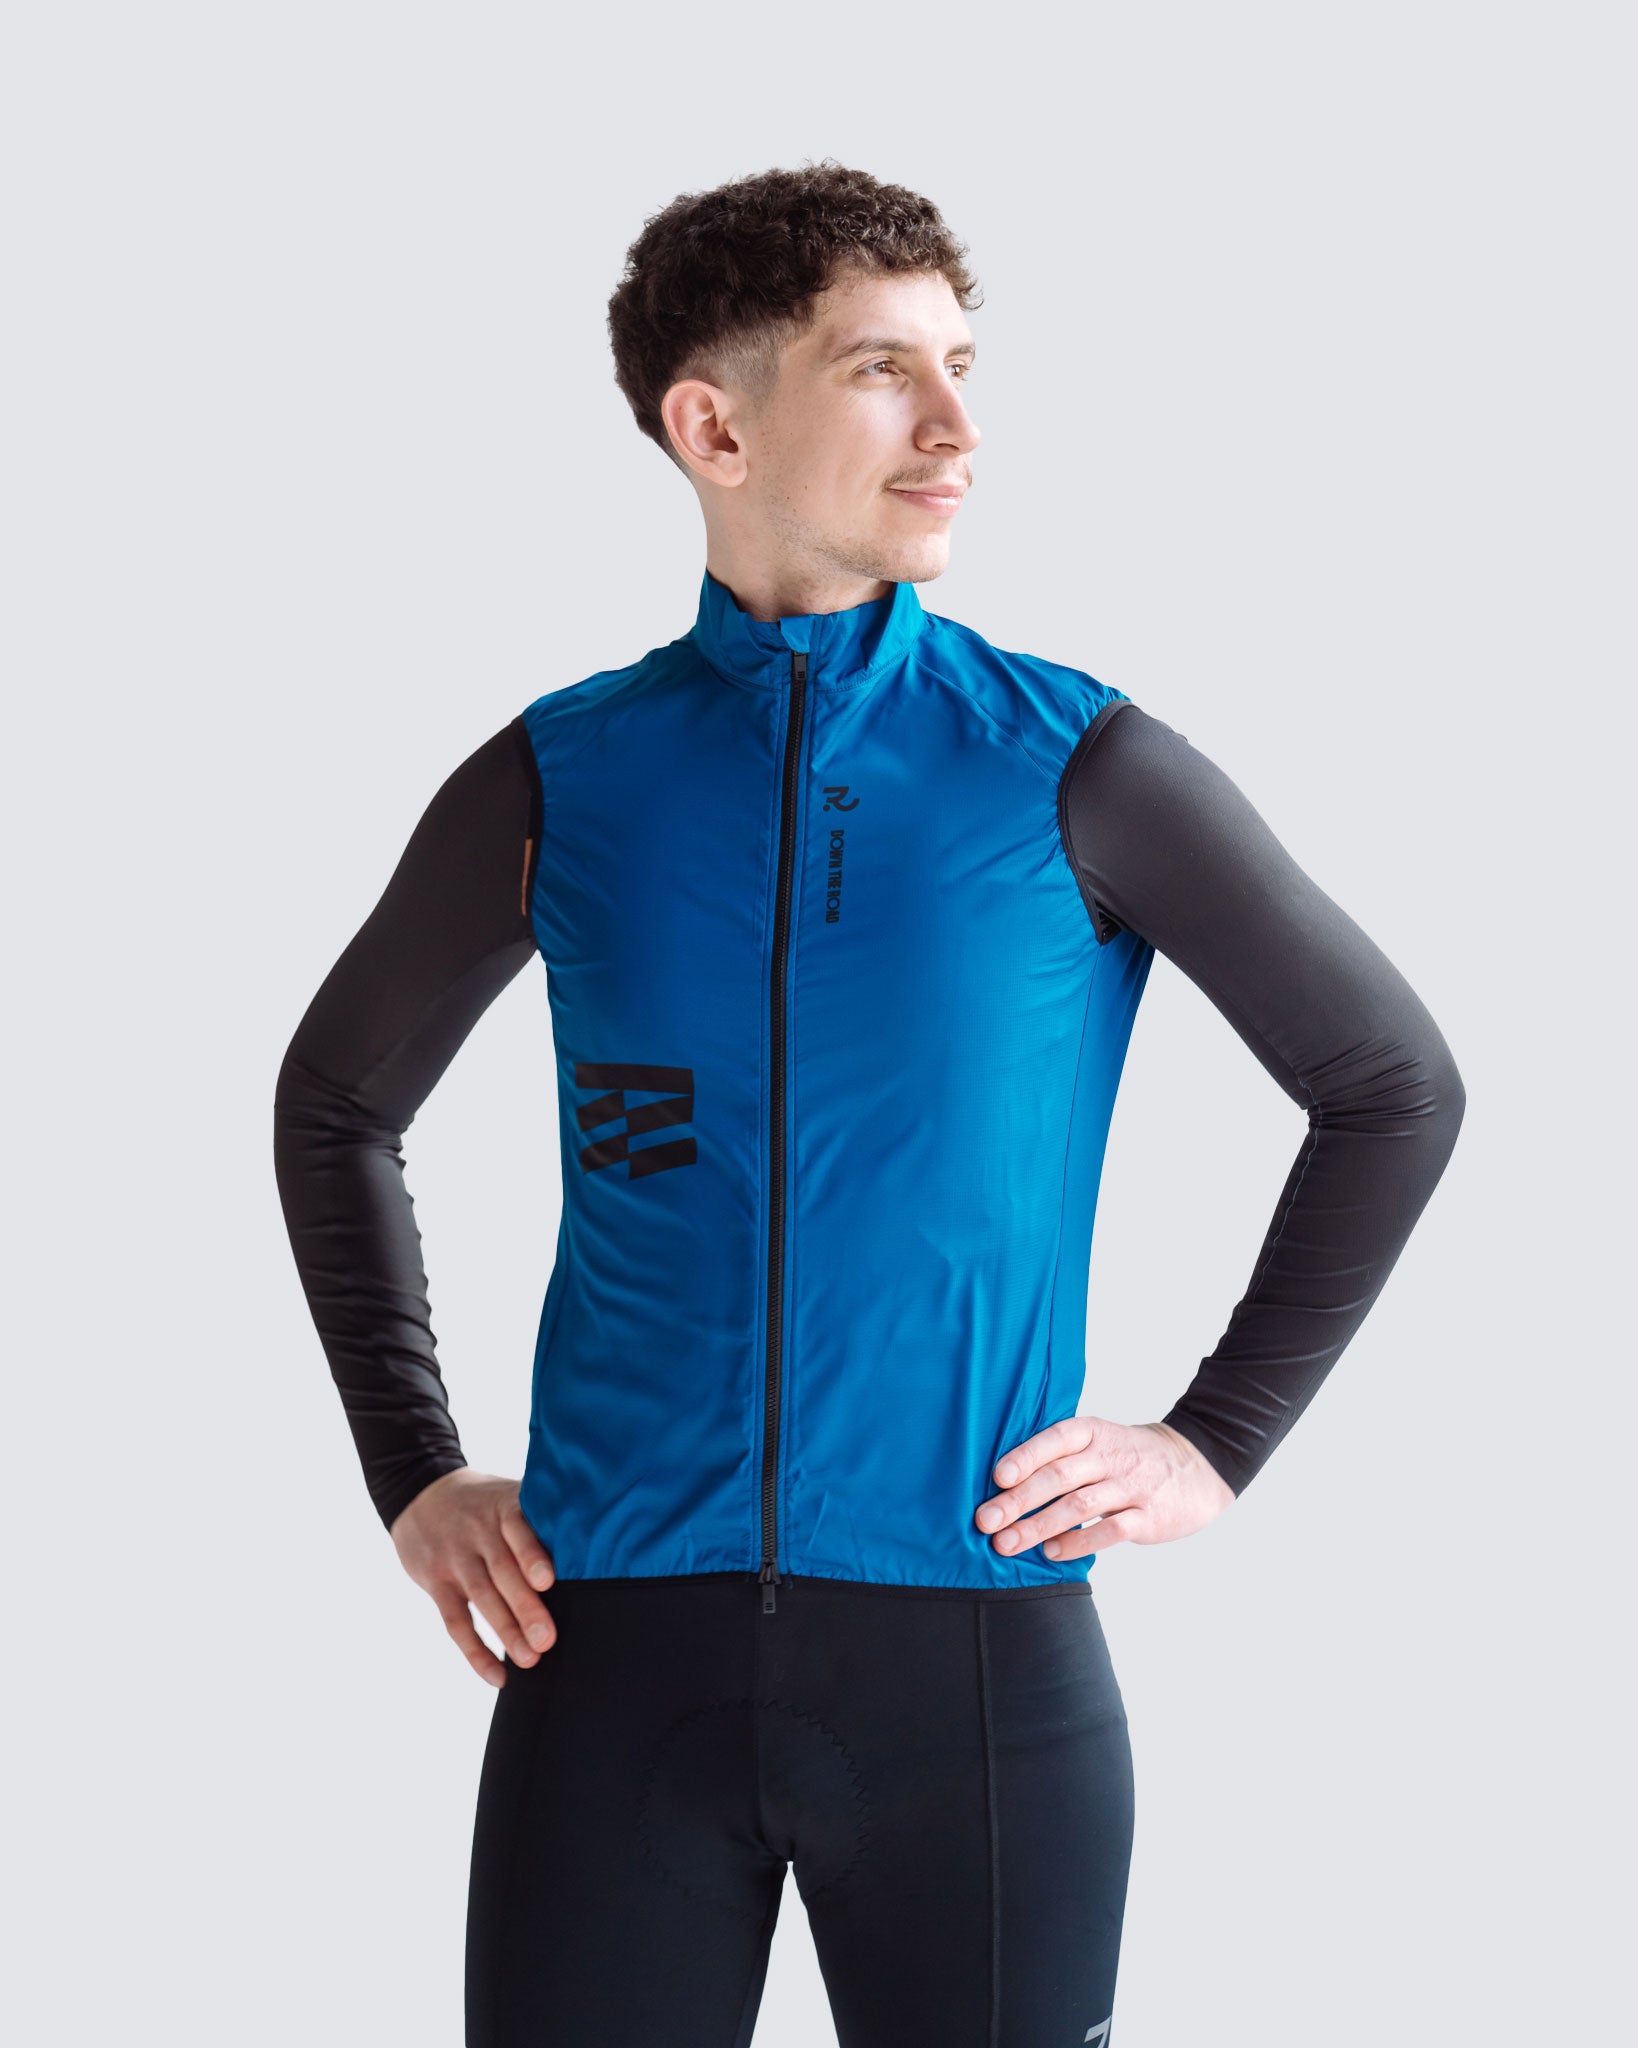 Wavy teal men cycling vest front view